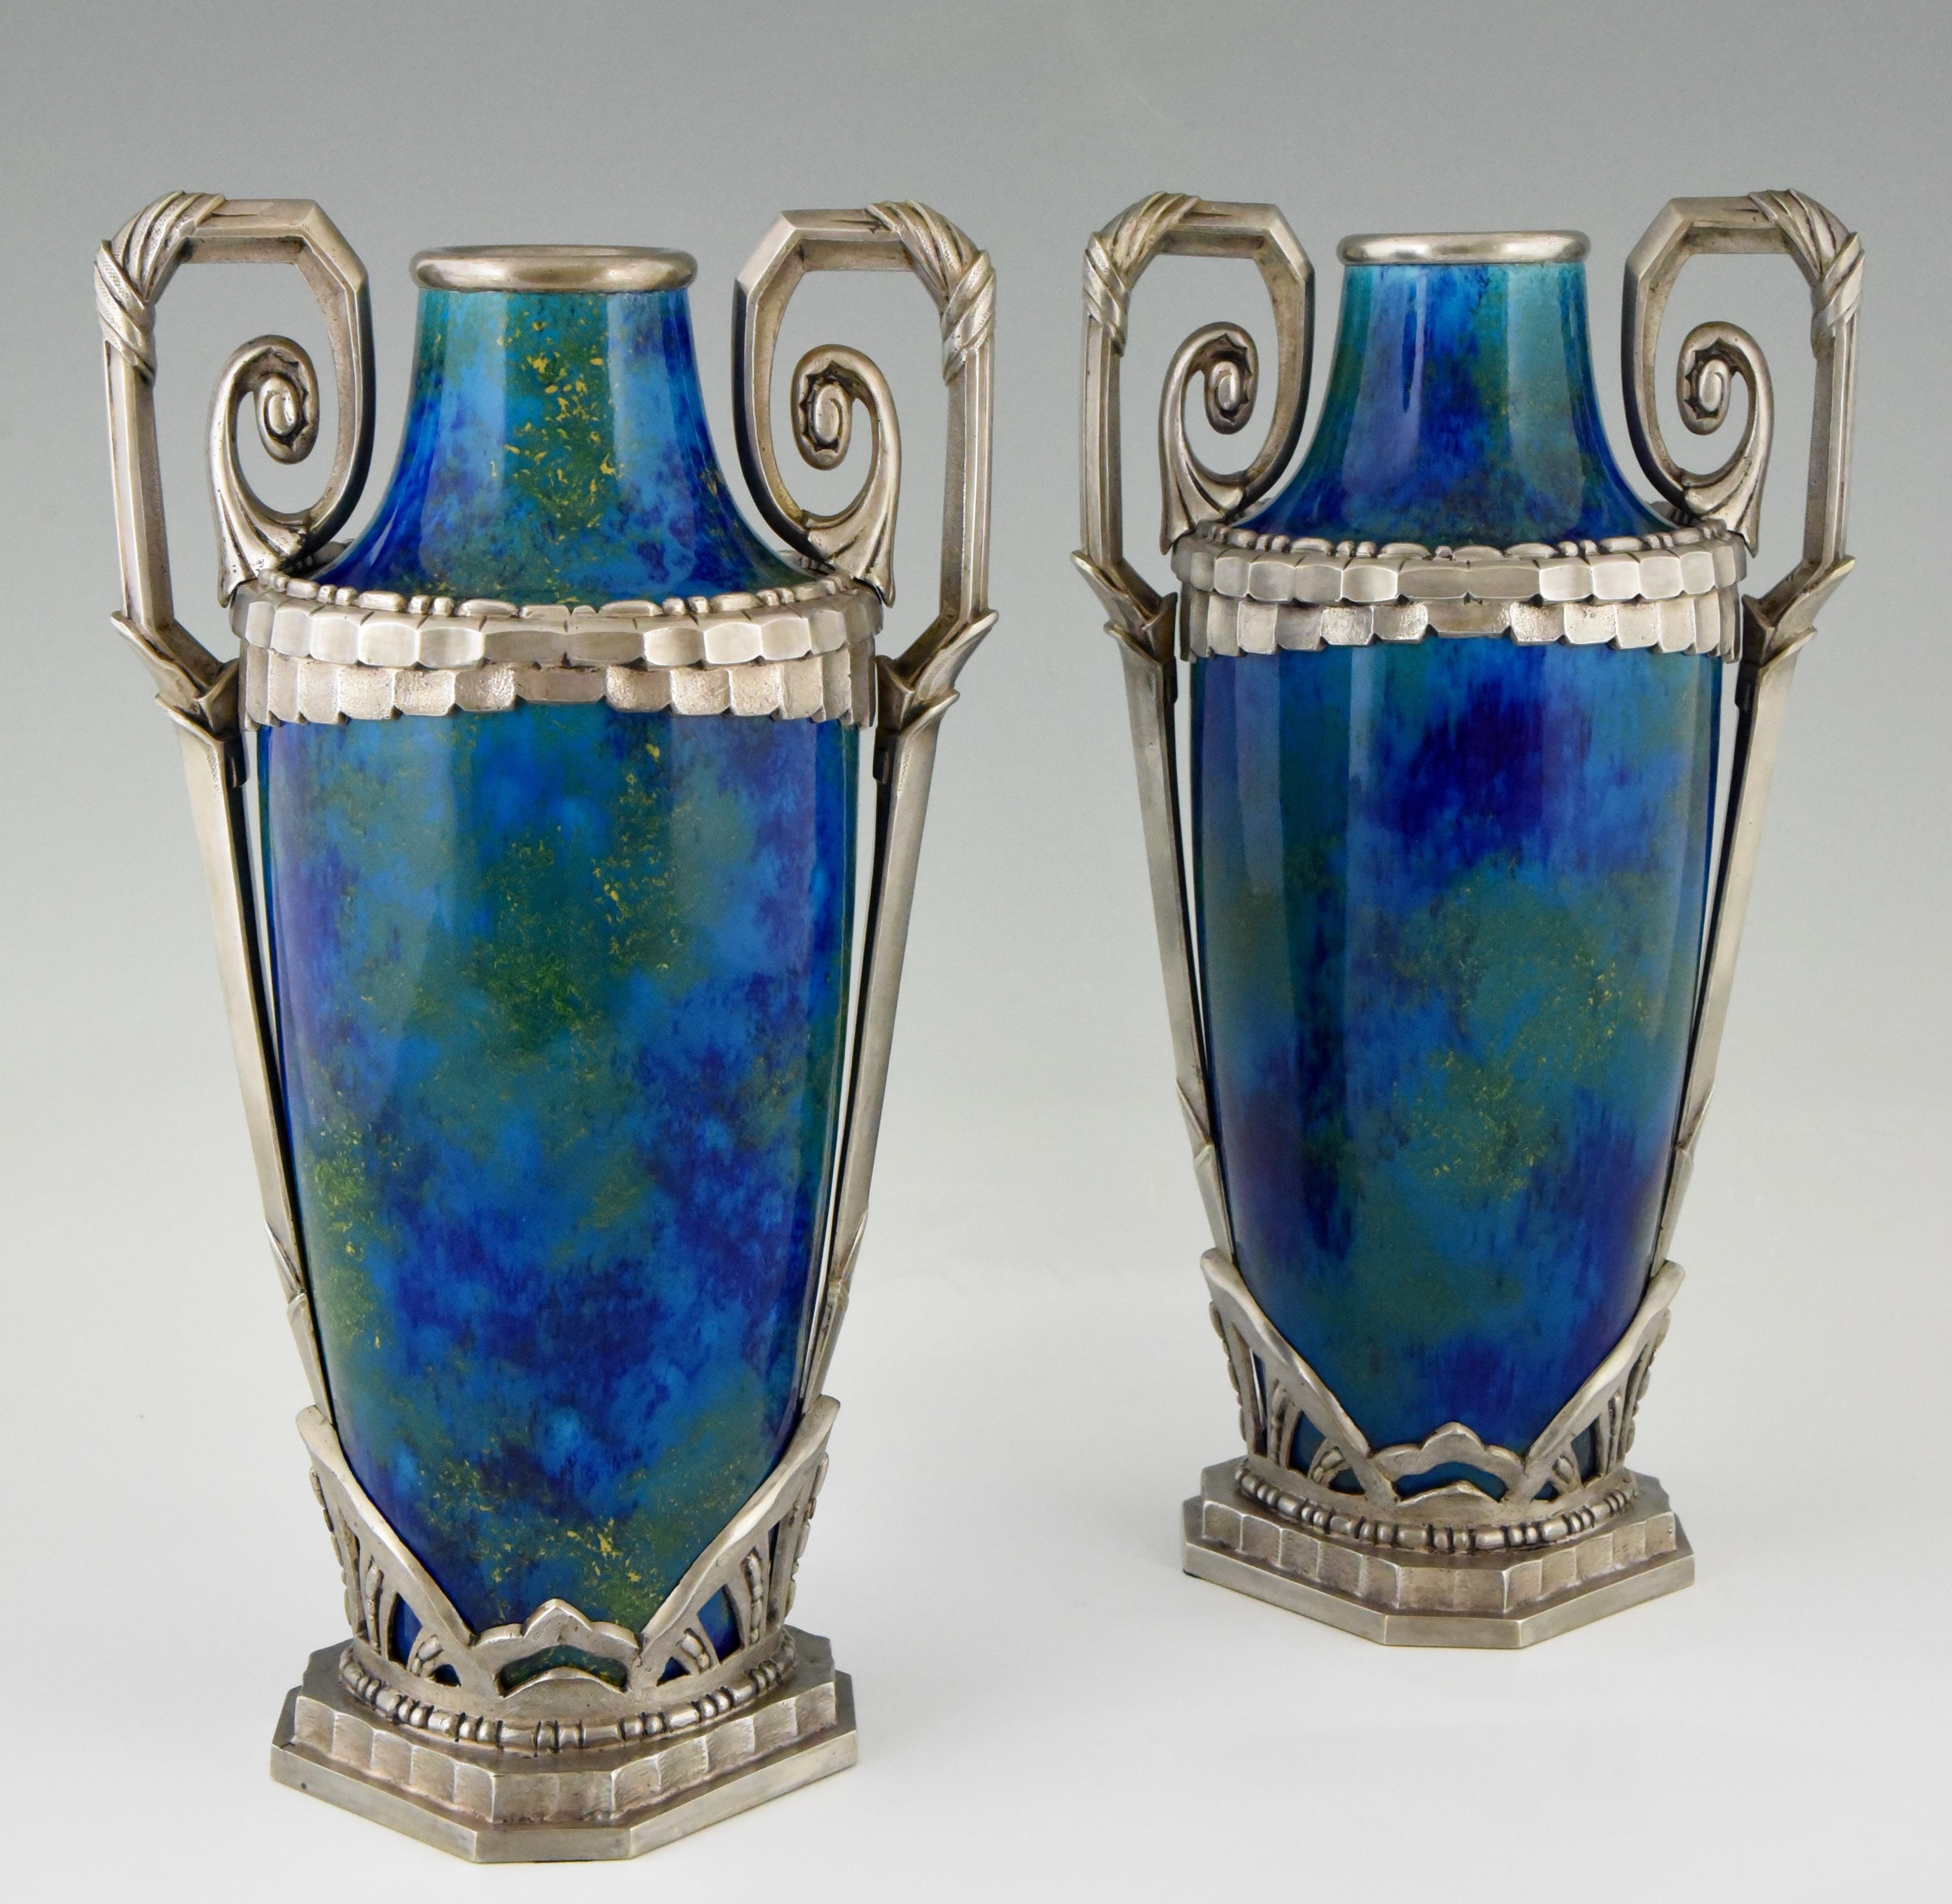 French Pair of Art Deco Blue Ceramic and Bronze Vases Paul Milet for Sevres 1920 France